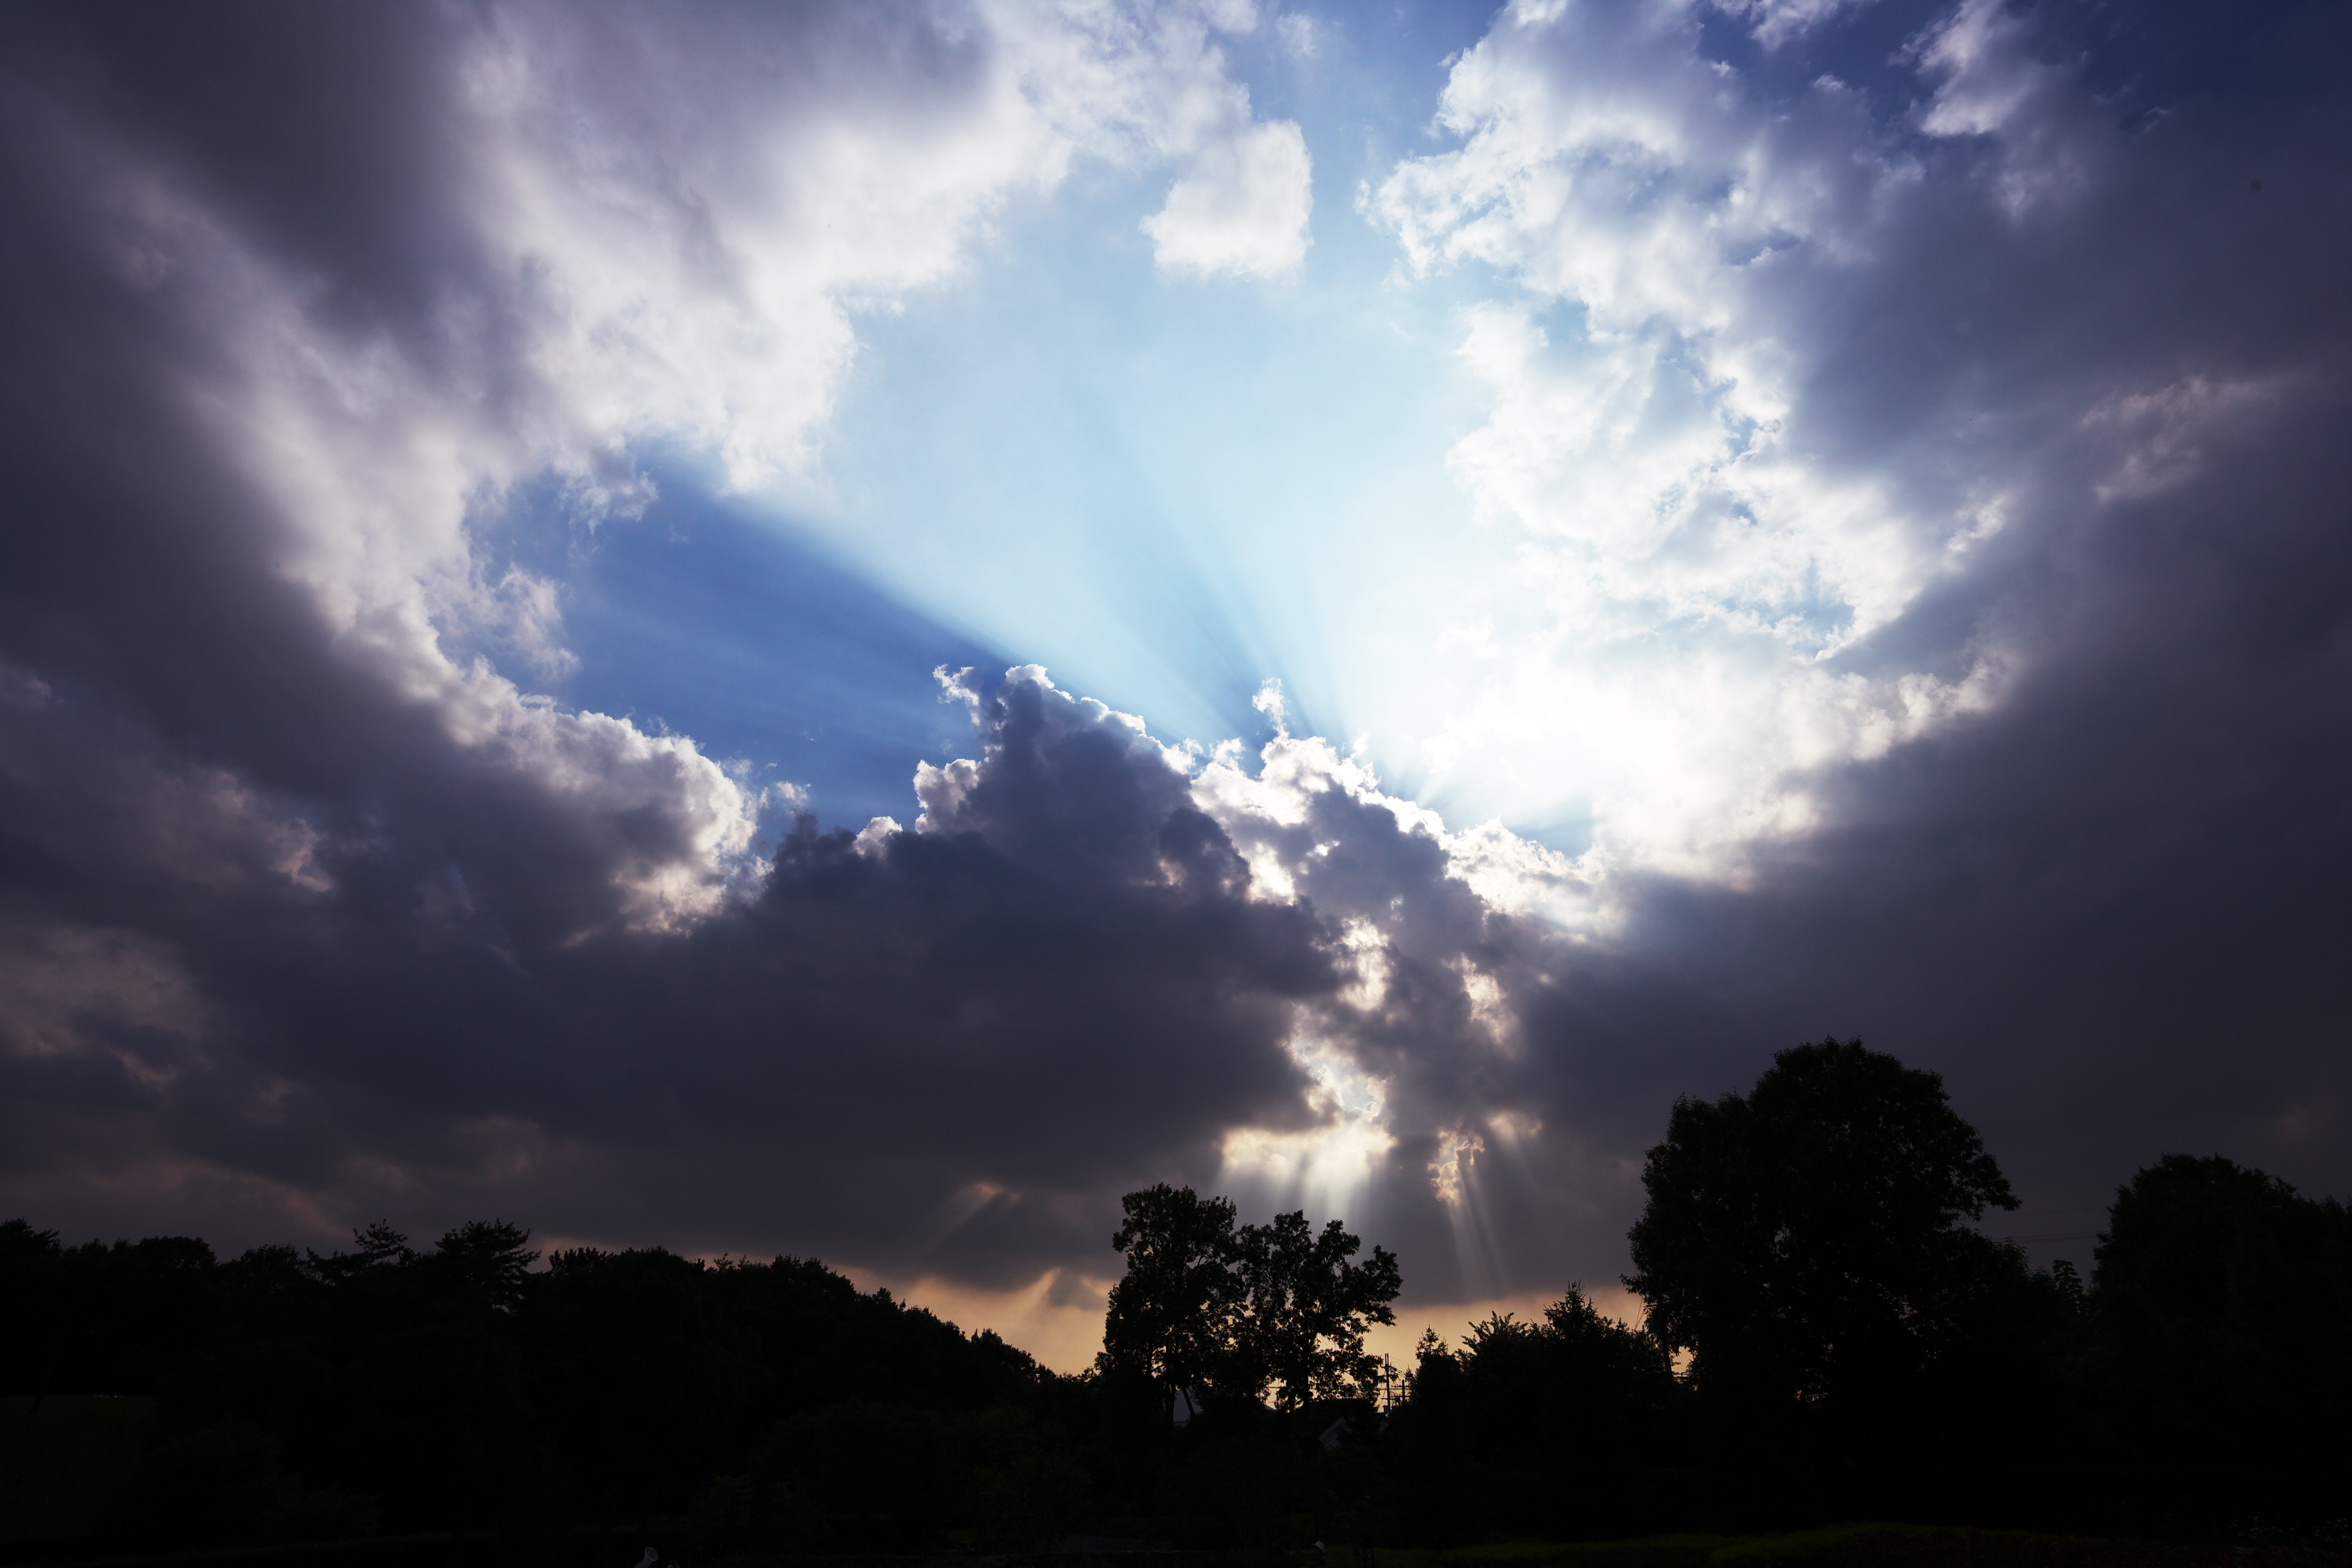 photo,material,free,landscape,picture,stock photo,Creative Commons,A voice from heaven, cloud, shaft of light, The sun, Brightness